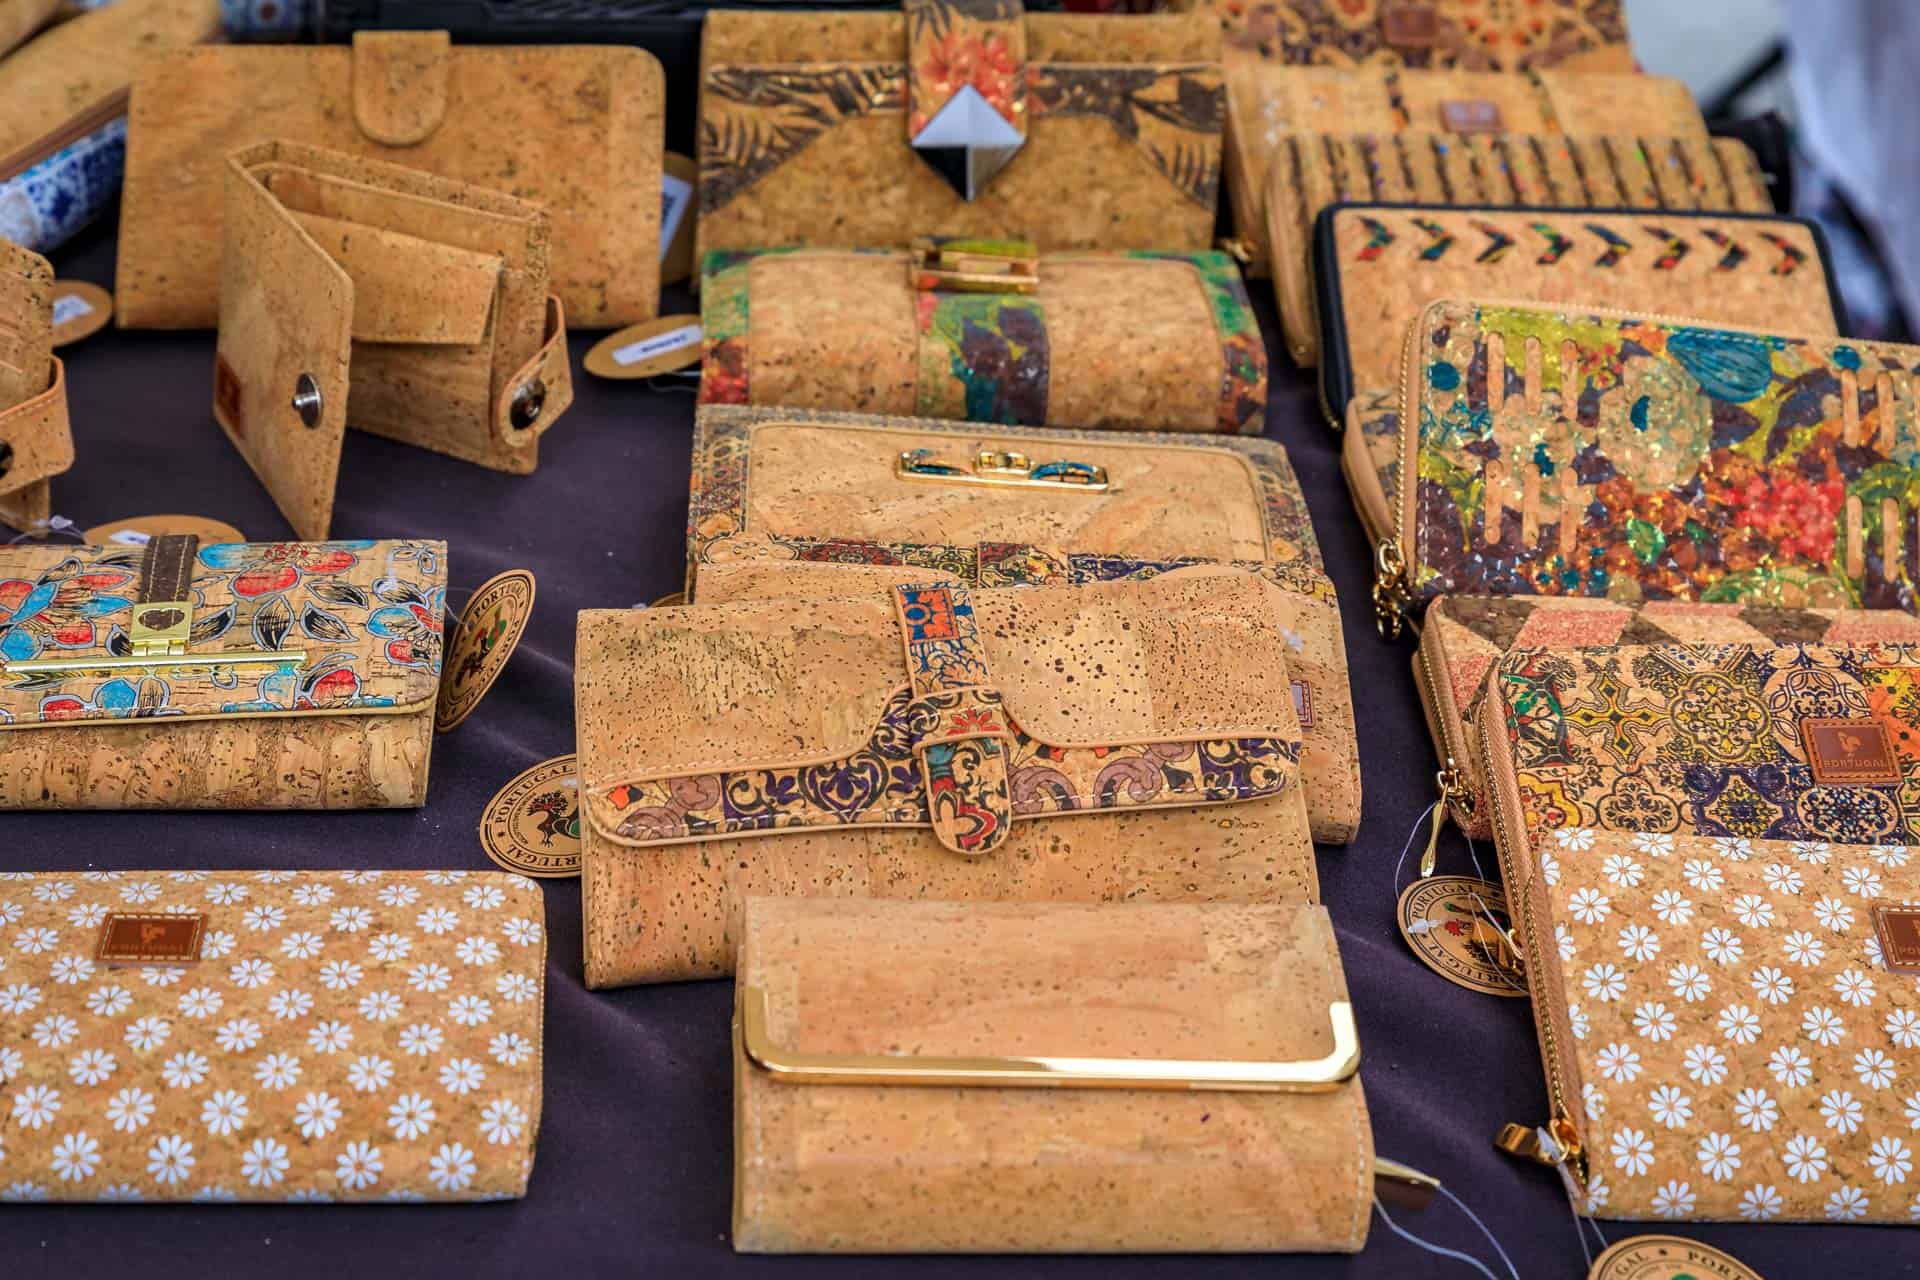 Table displaying the best sustainable wallets made from cork, with various decorative patterns.